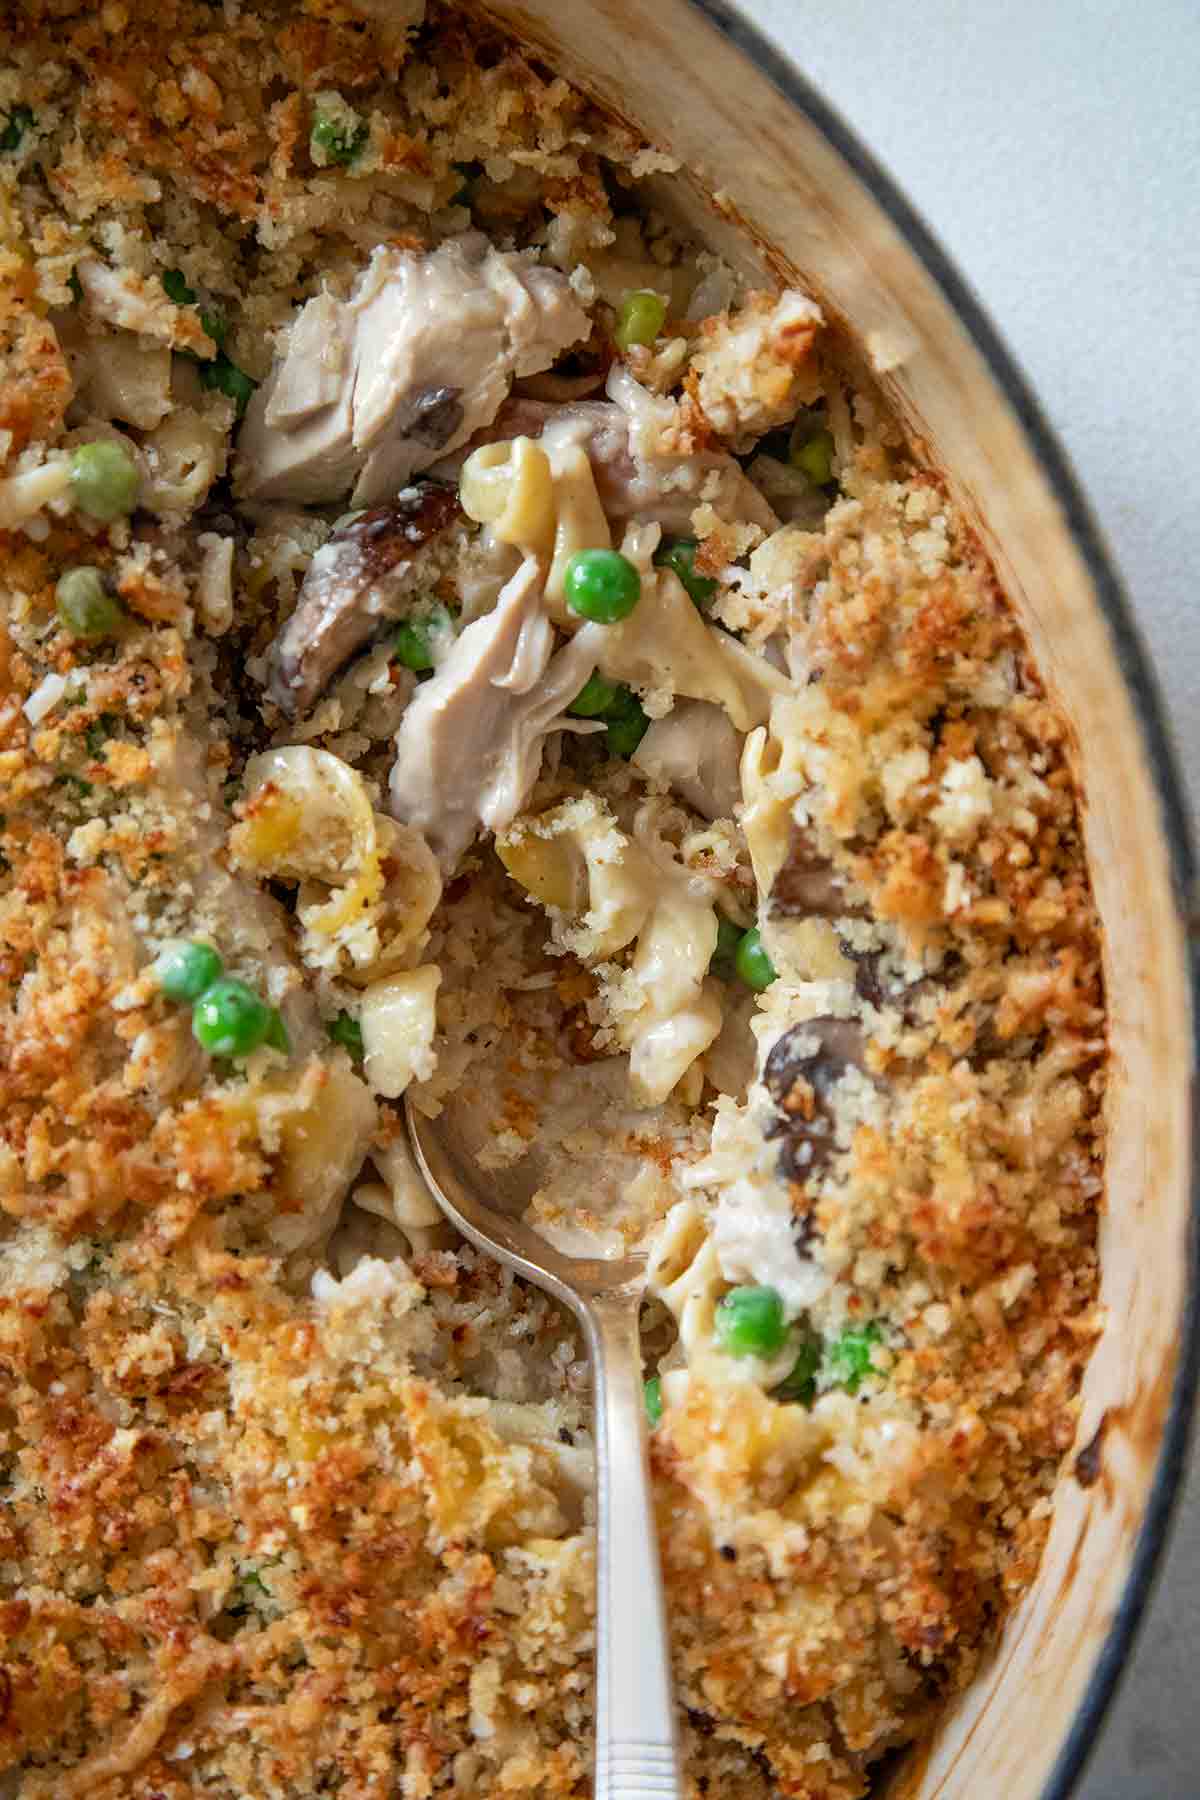 A serving spoon resting inside a Dutch oven filled with turkey tetrazzini.